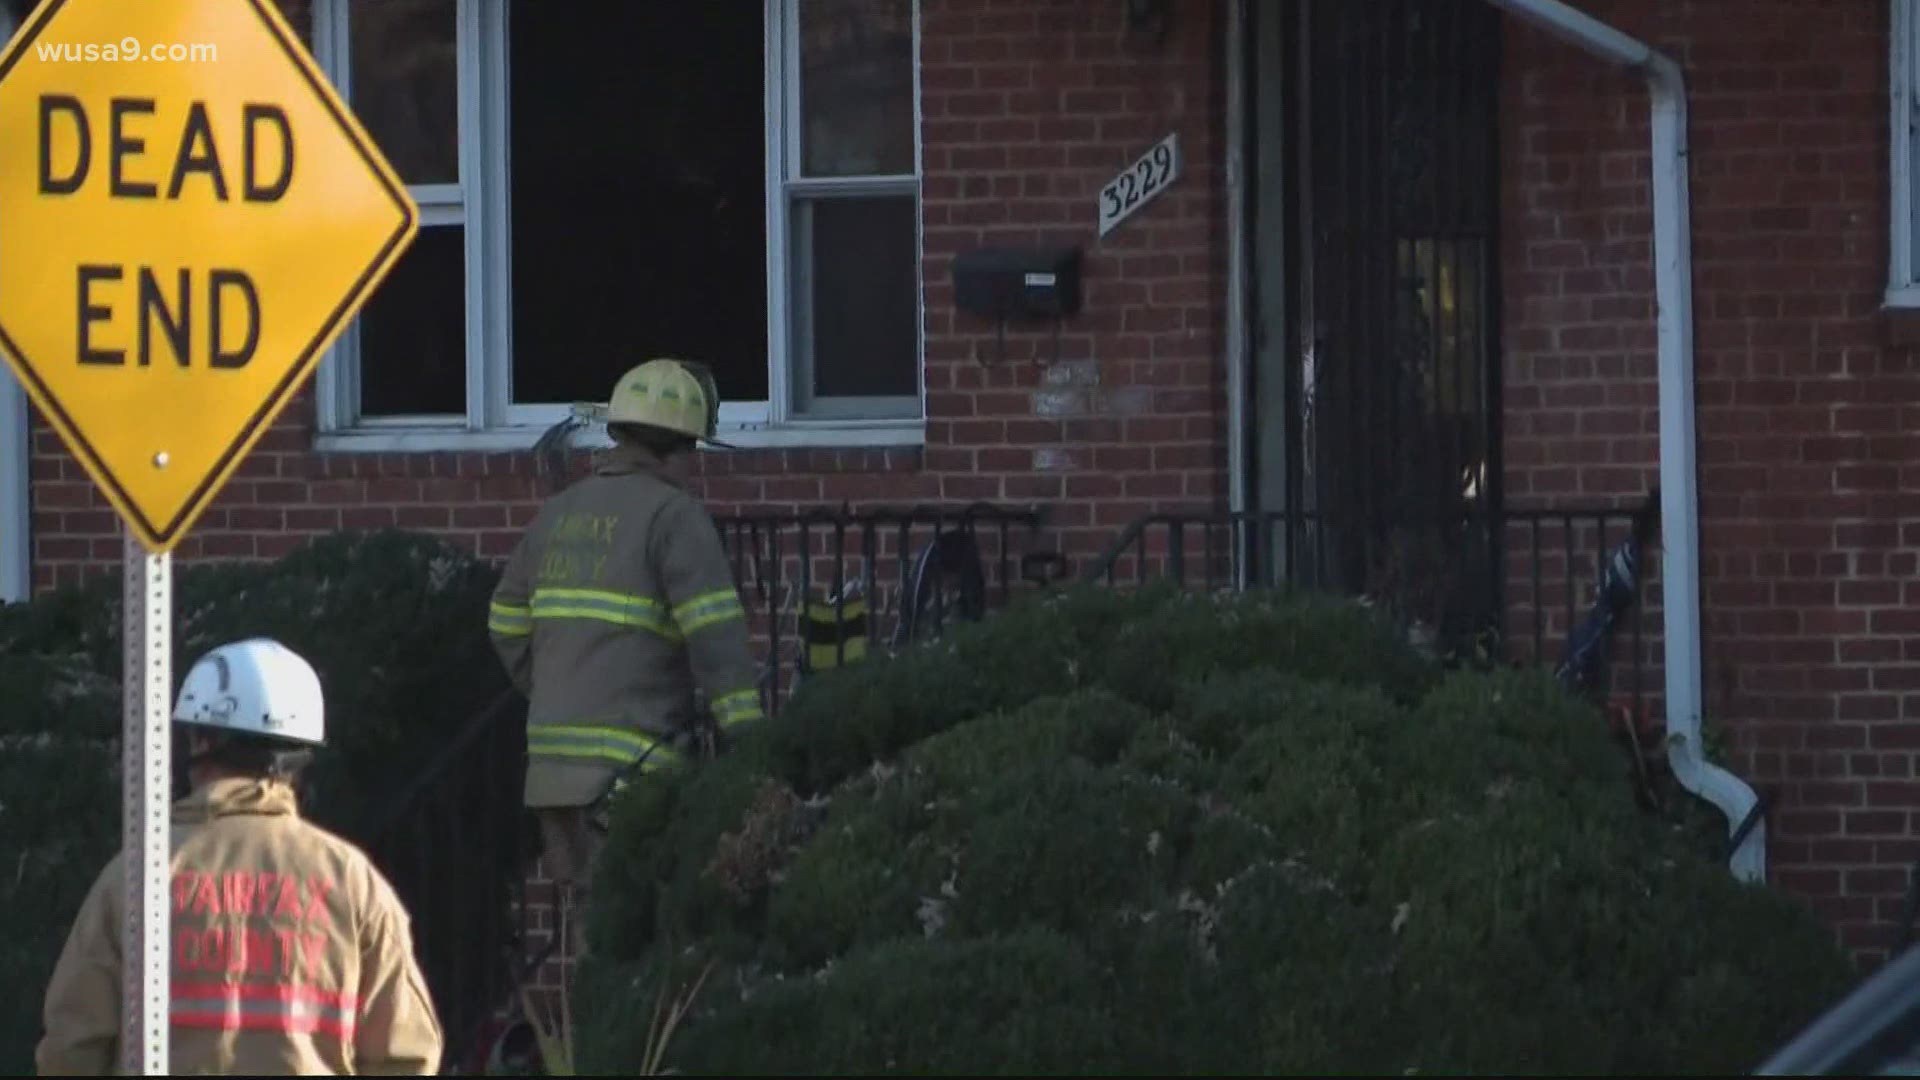 The deadly fire happened at a single-family home located in the West Falls Church area.